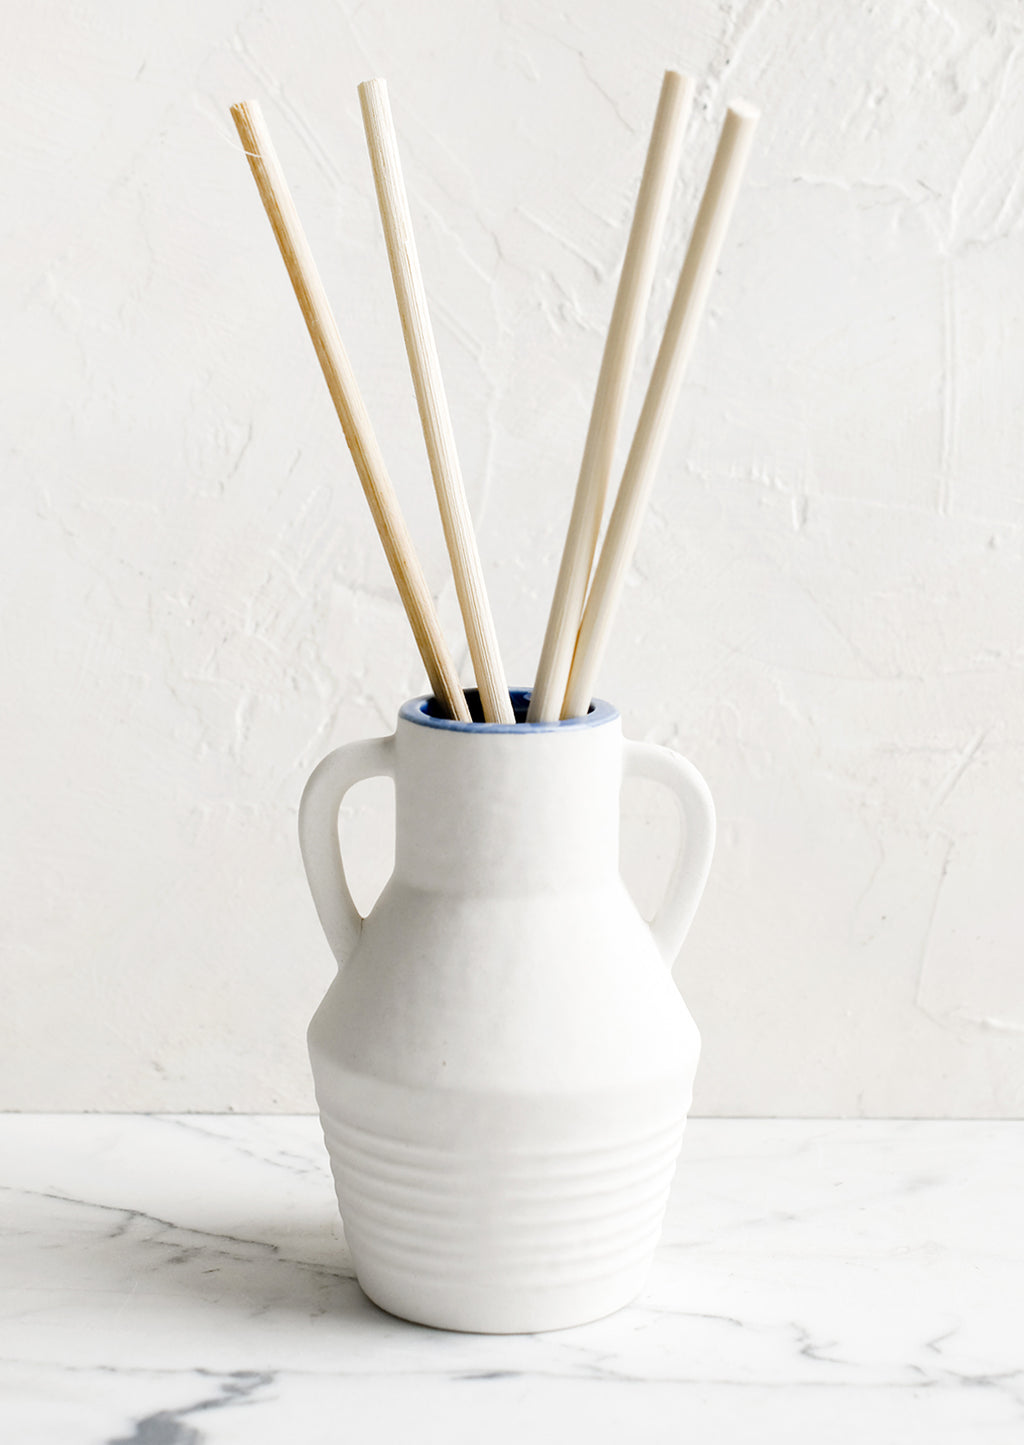 Cliff & Hinoki Wood: A ceramic reed diffuser bottle in white.